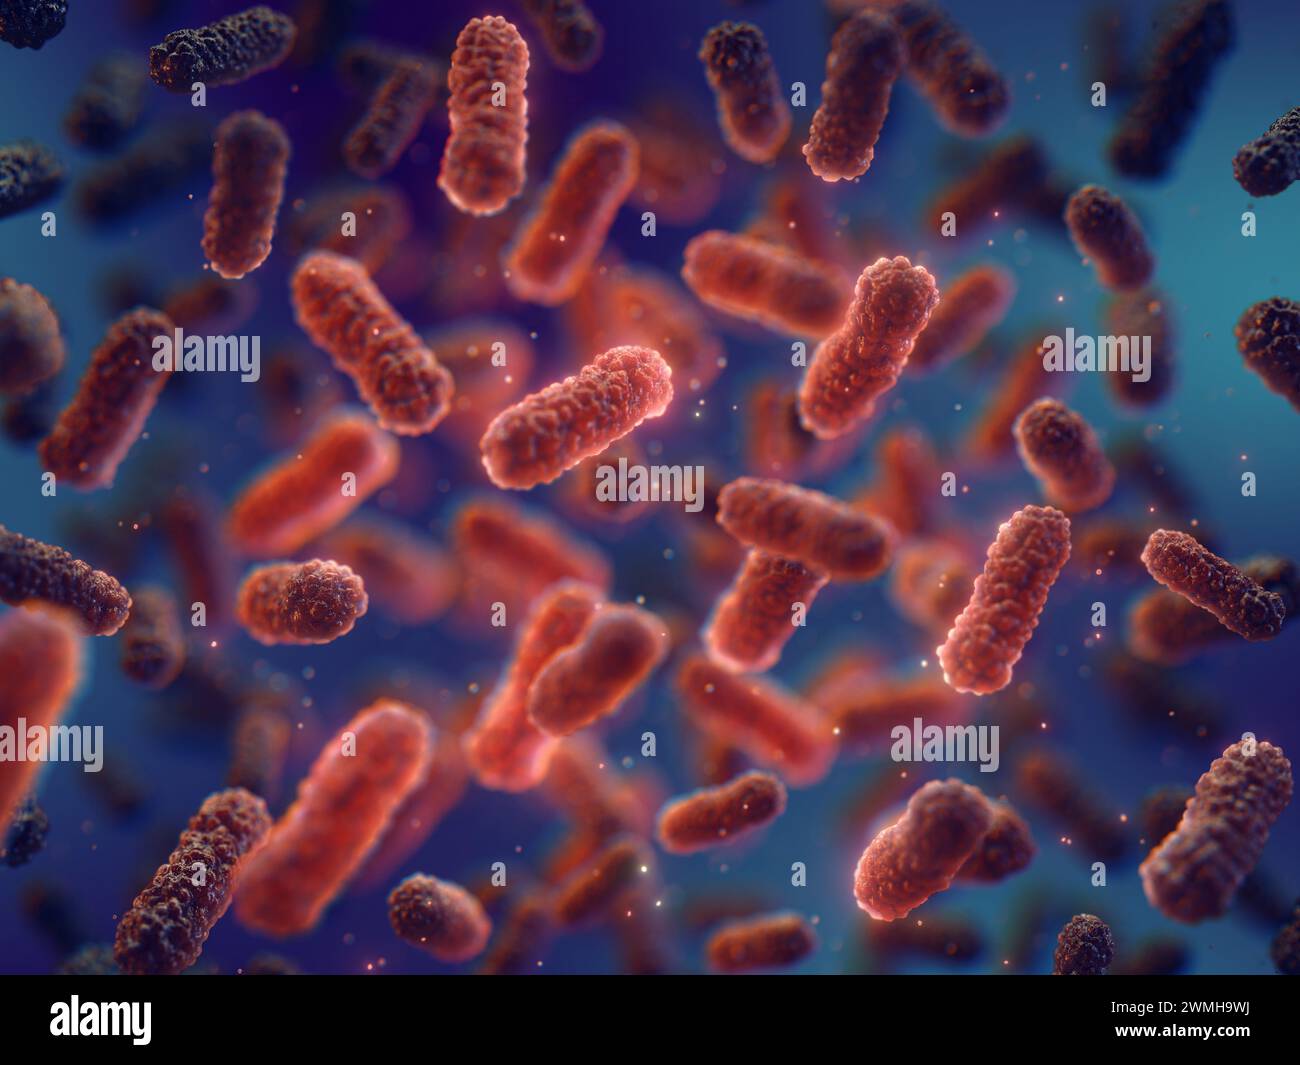 Antibiotic use is leading to decreased immunity and bacterial co-infection. Red pathogenic bacteria on dark background. Drug resistant bacteria Stock Photo